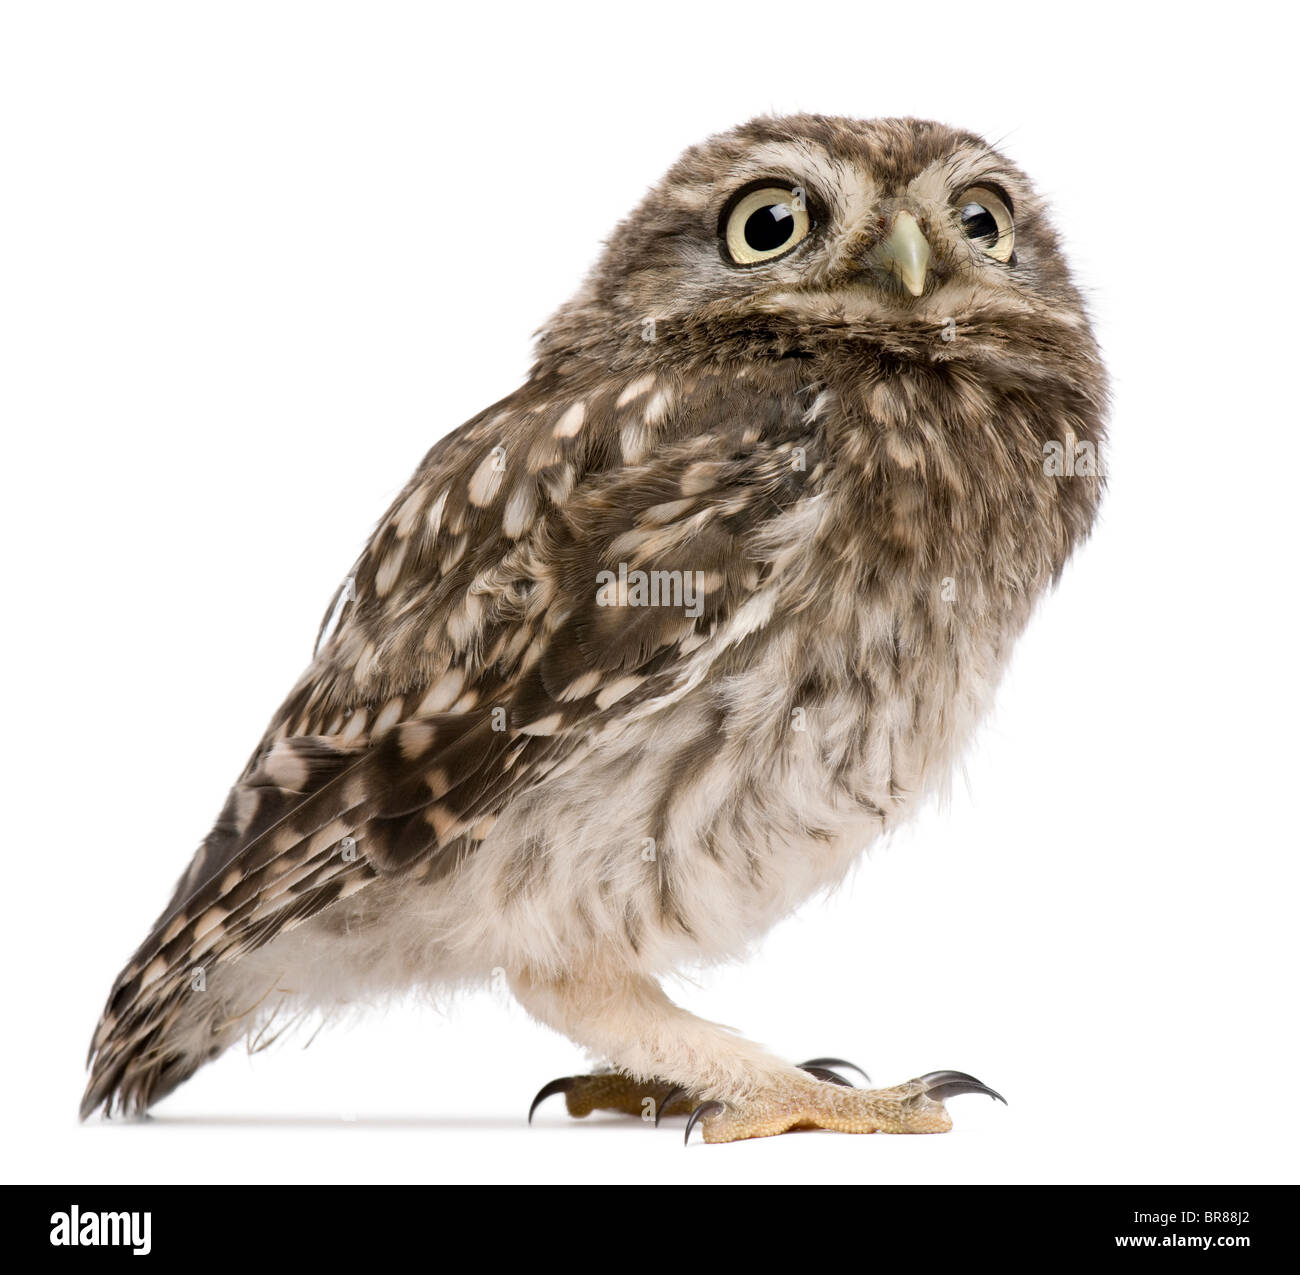 Little Owl, 50 days old, Athene noctua, standing in front of a white background Stock Photo